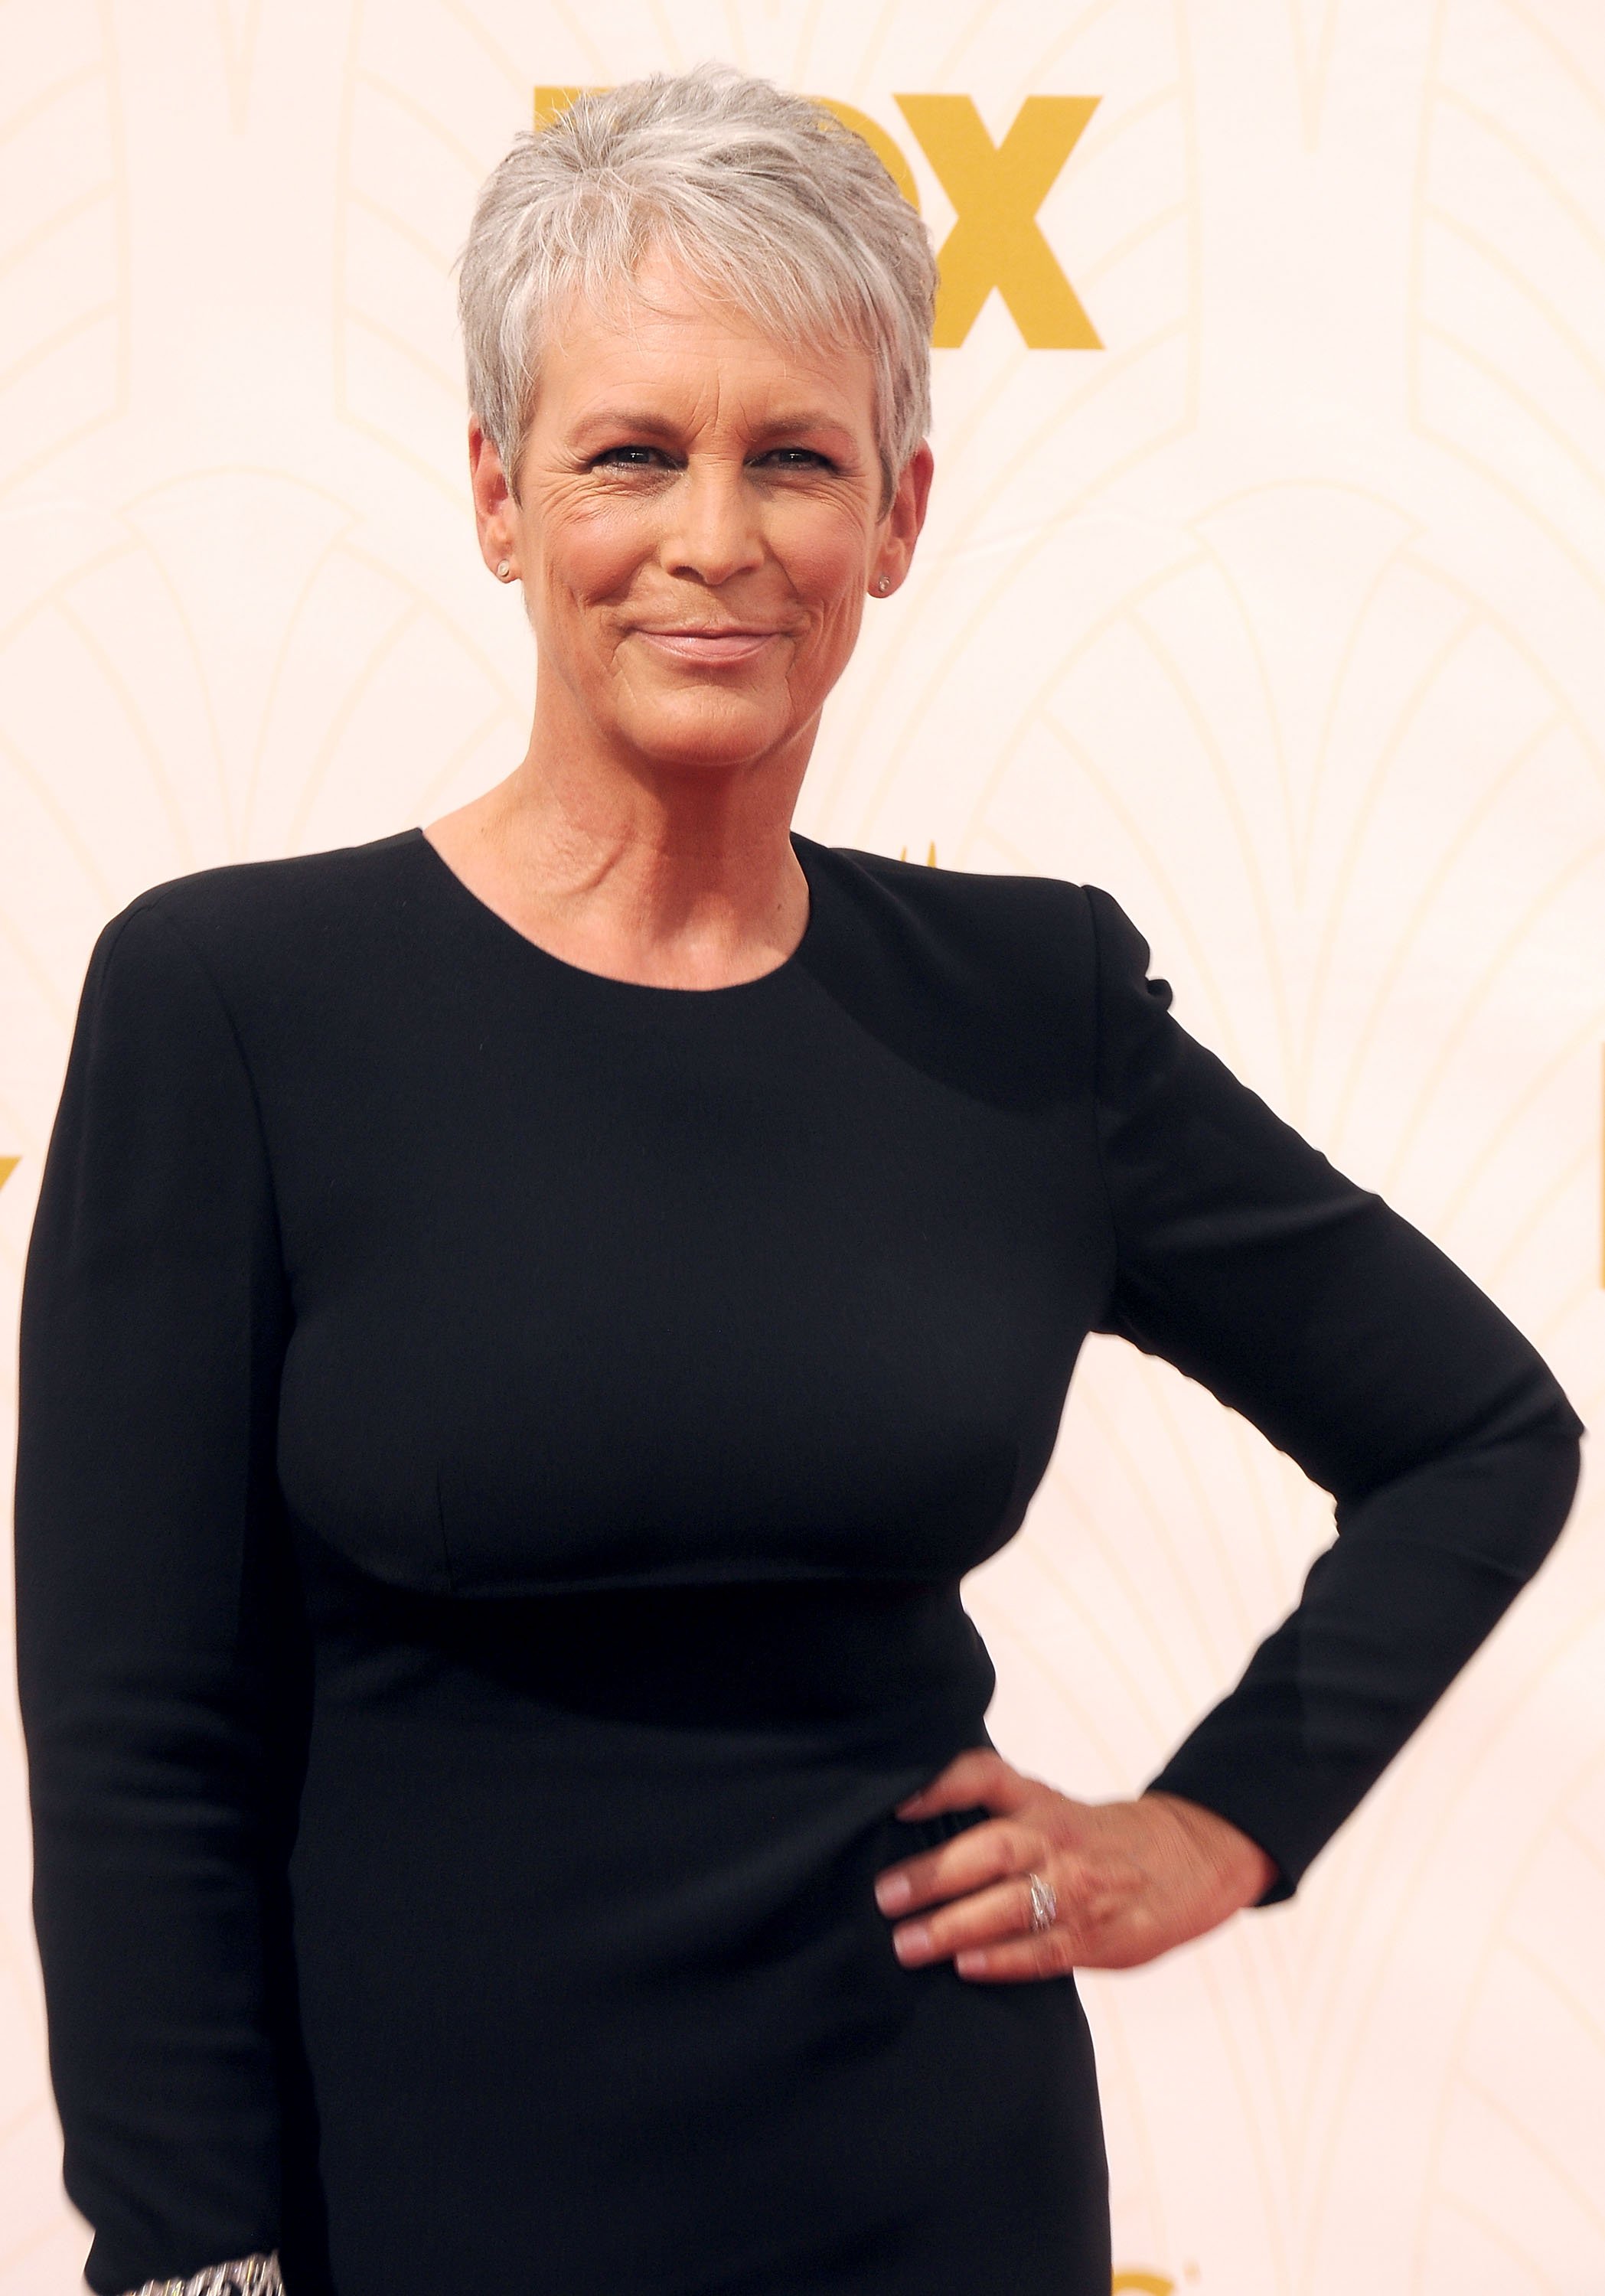 Jamie Lee Curtis attends the Annual Primetime Emmy Awards in Los Angeles, California on September 20, 2015 | Photo: Getty Images